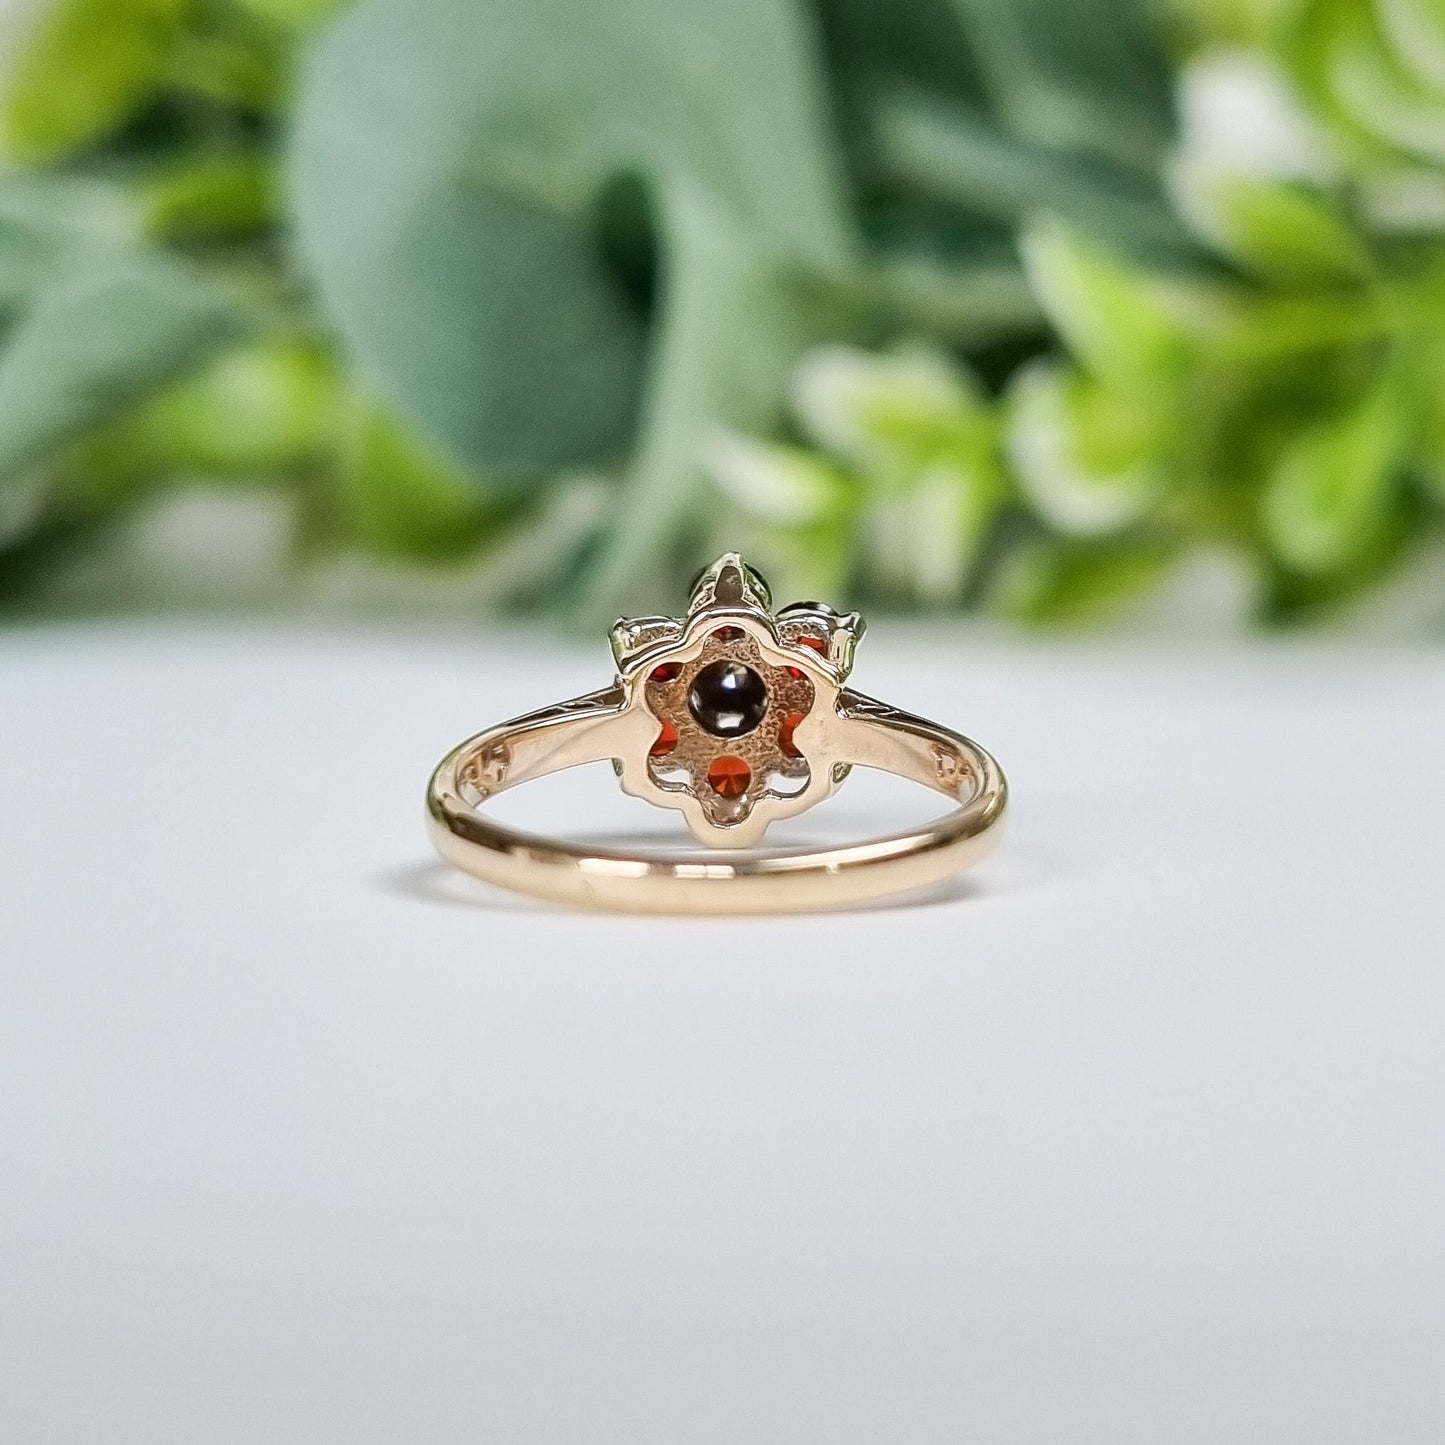 Vintage 9ct Yellow Gold Garnet and Diamond Flower Cluster Ring